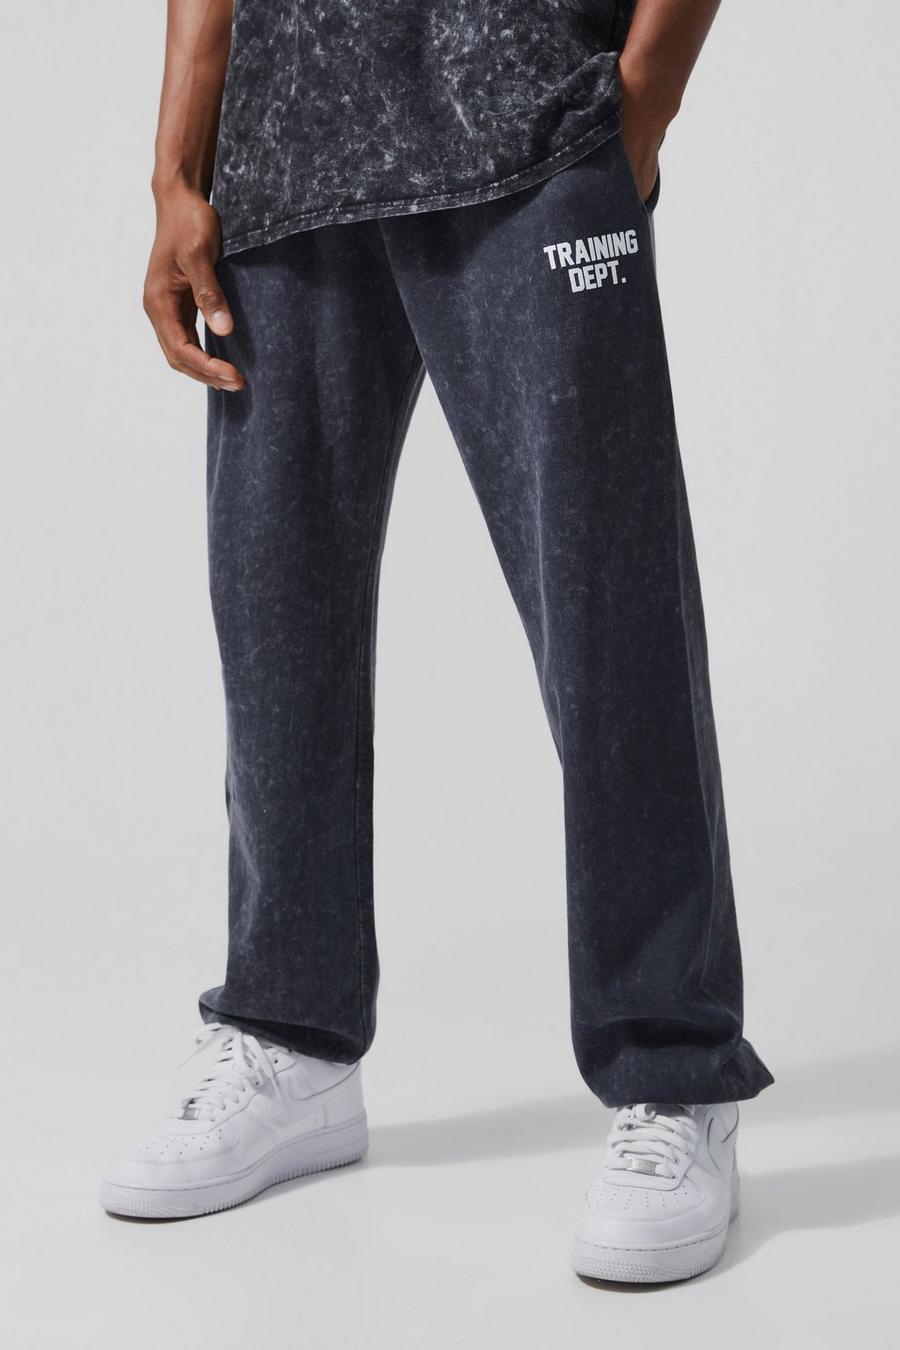 Active Training Dept Stretch Woven Jogger